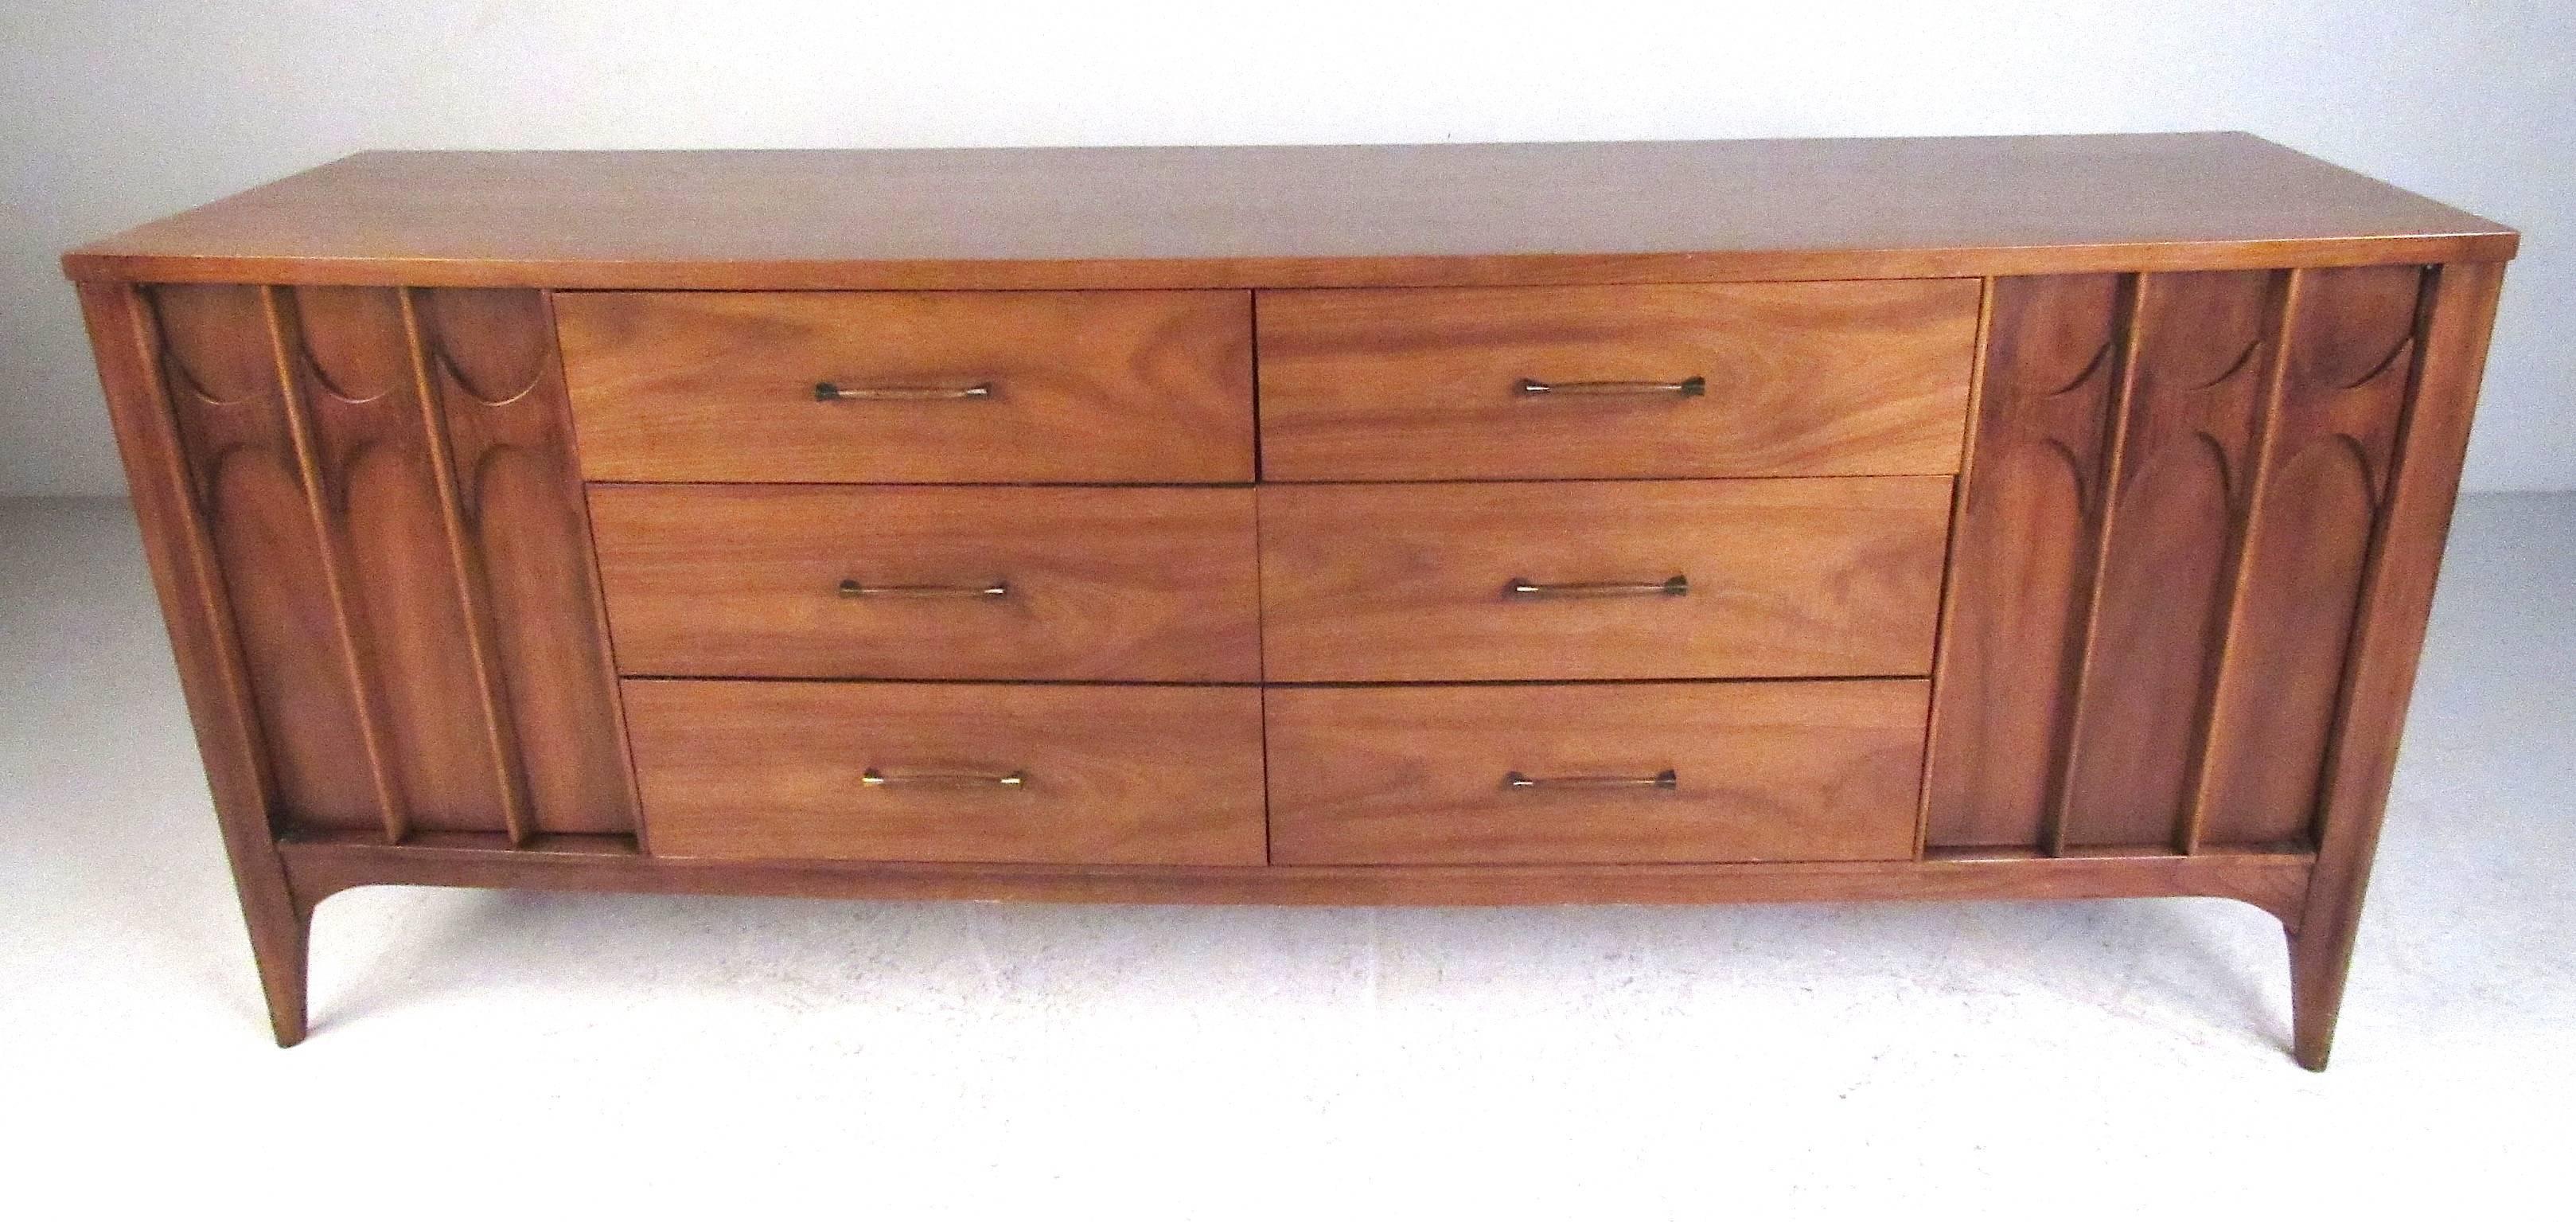 Mid-Century walnut dresser with six center drawers flanked by two doors with three drawers each. Well made and nicely detailed this dresser was designed and manufactured by Kent-Coffey, North Carolina, in the 1960s. Please confirm item location (NY